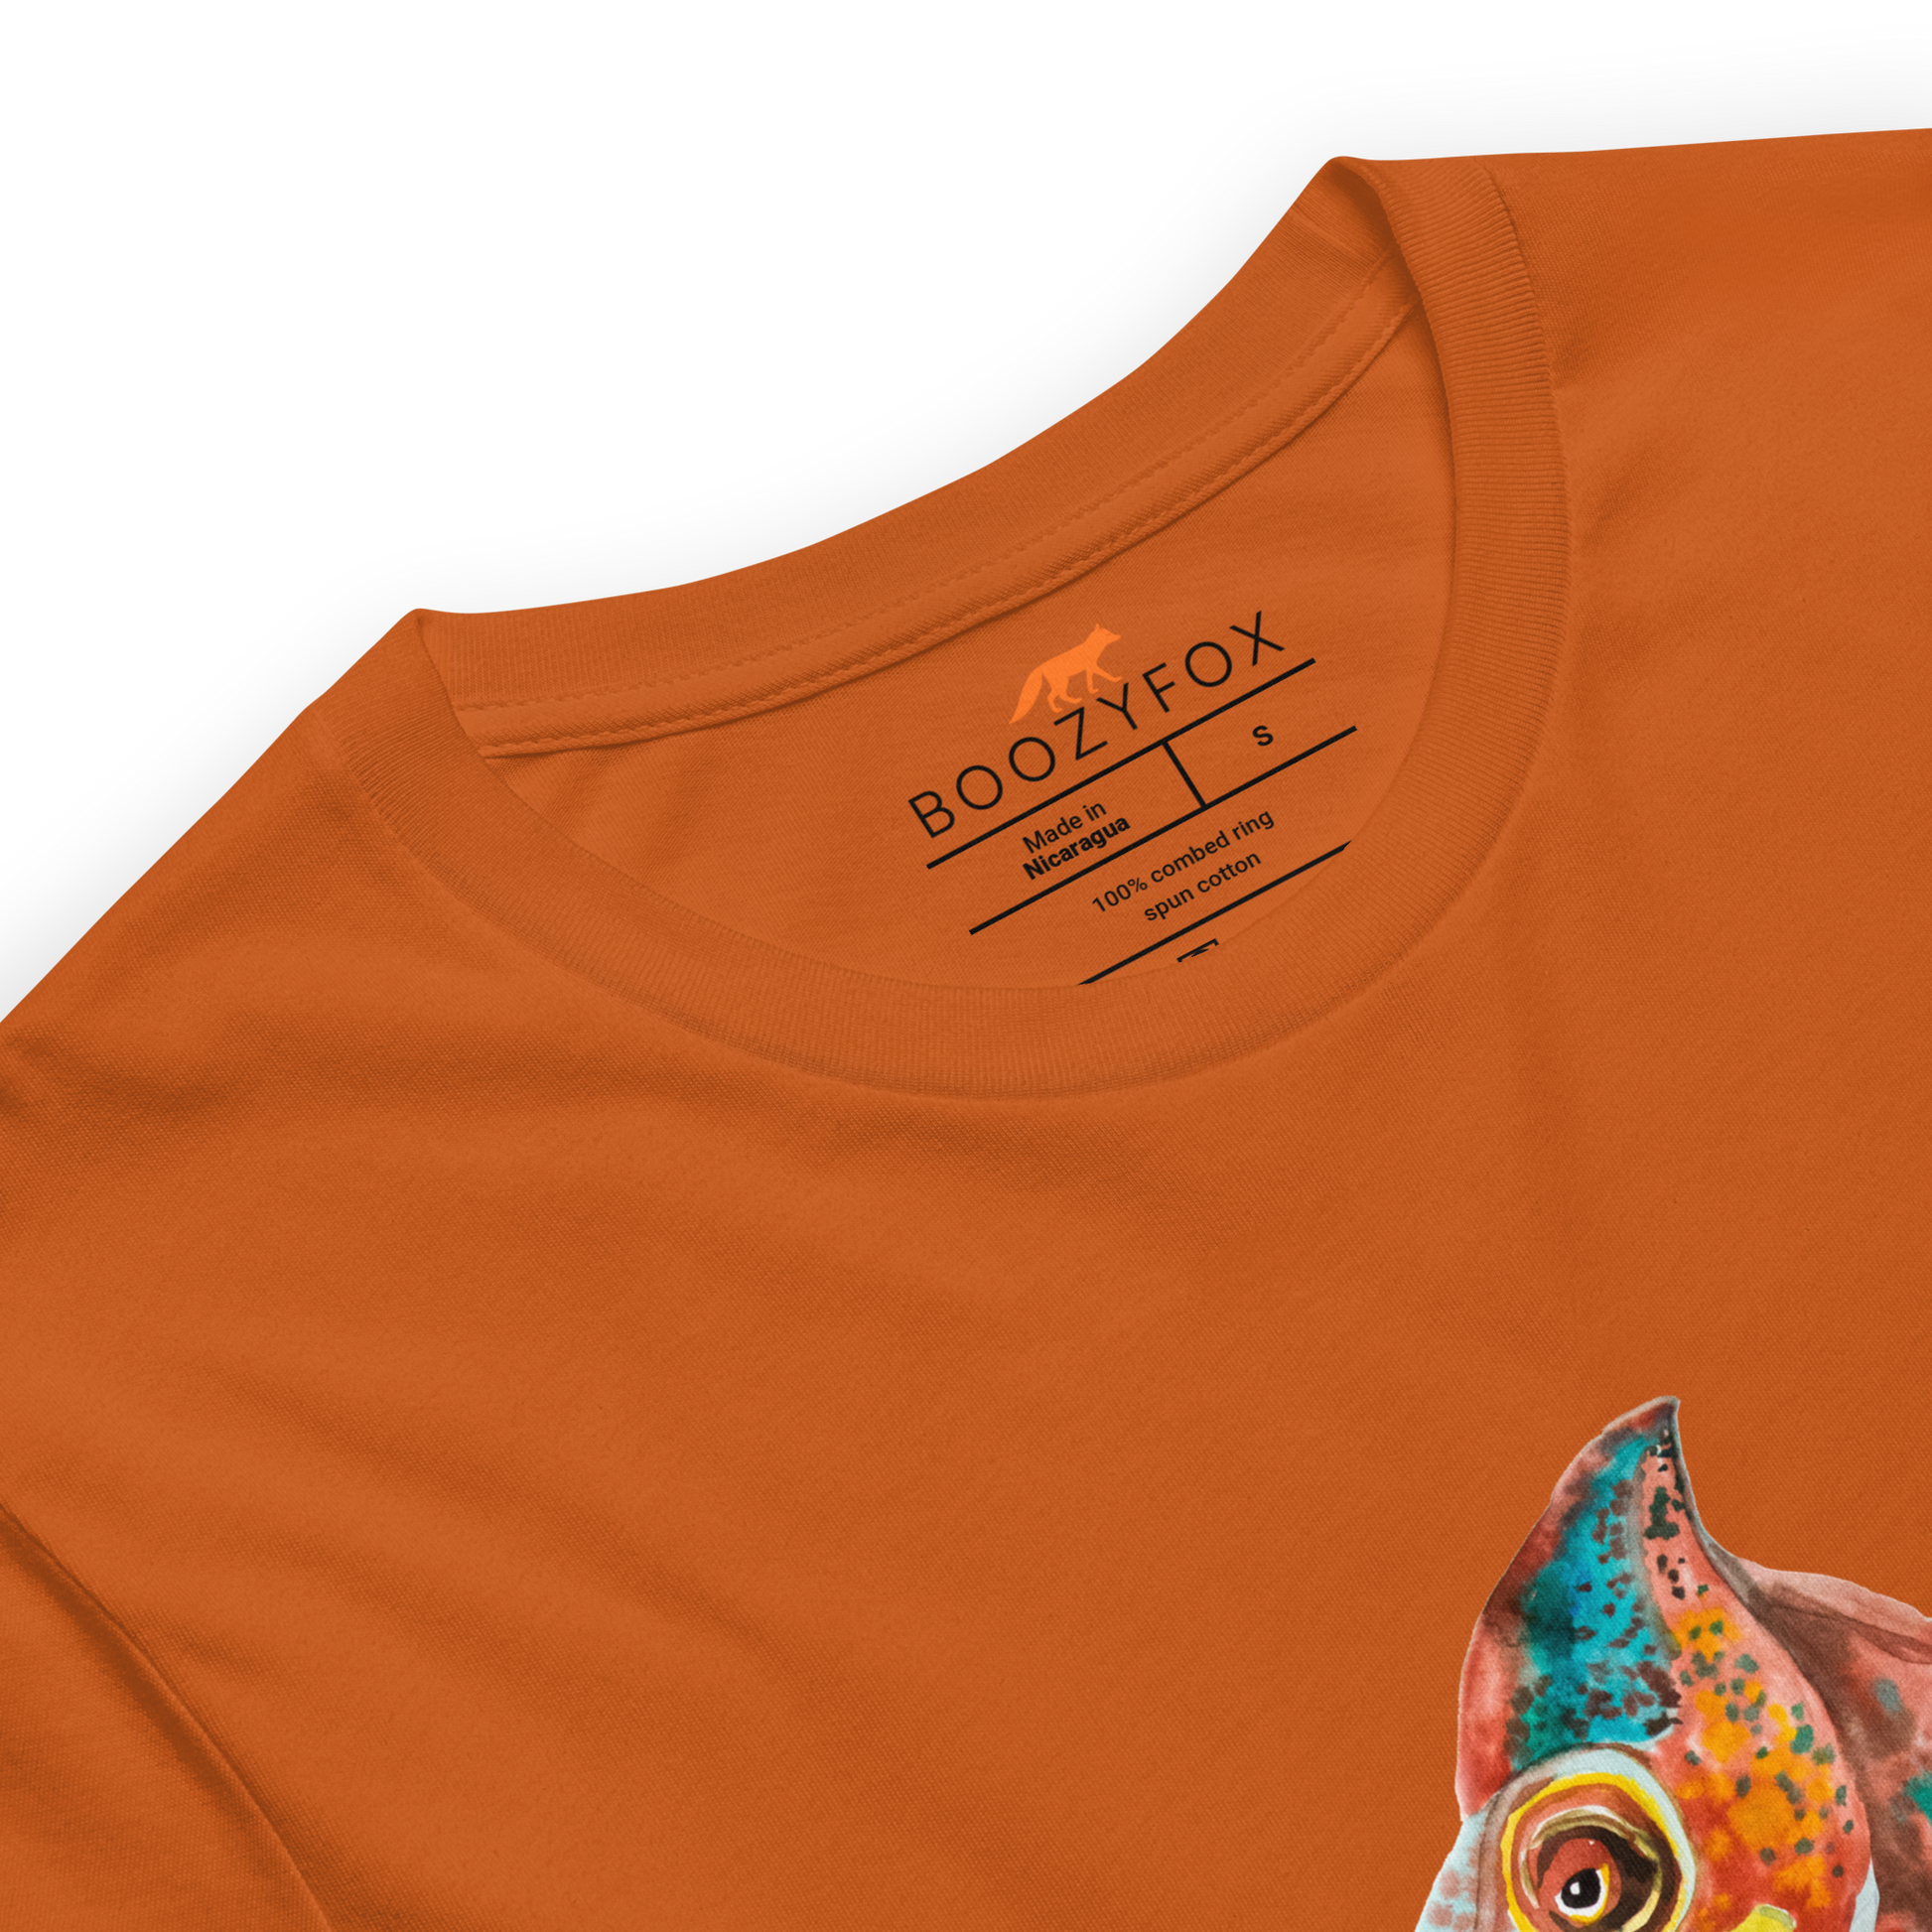 Product Details of a Autumn Colored Premium Chameleon T-Shirt featuring a charming Chameleon With A Lollipop graphic on the chest - Cool Graphic Chameleon Tees - Boozy Fox